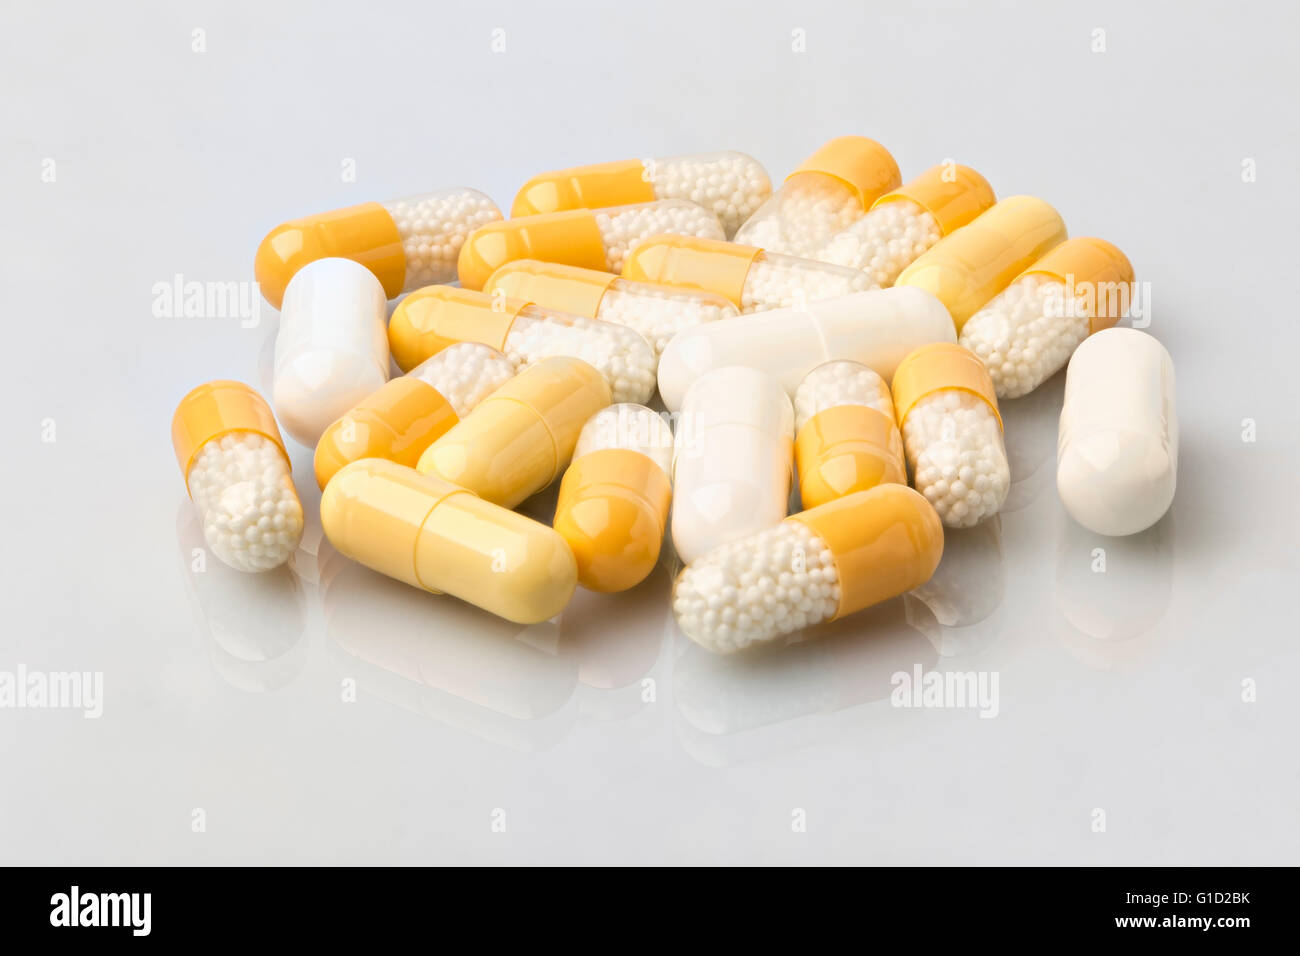 Various medical dosage capsule white and yellow Stock Photo